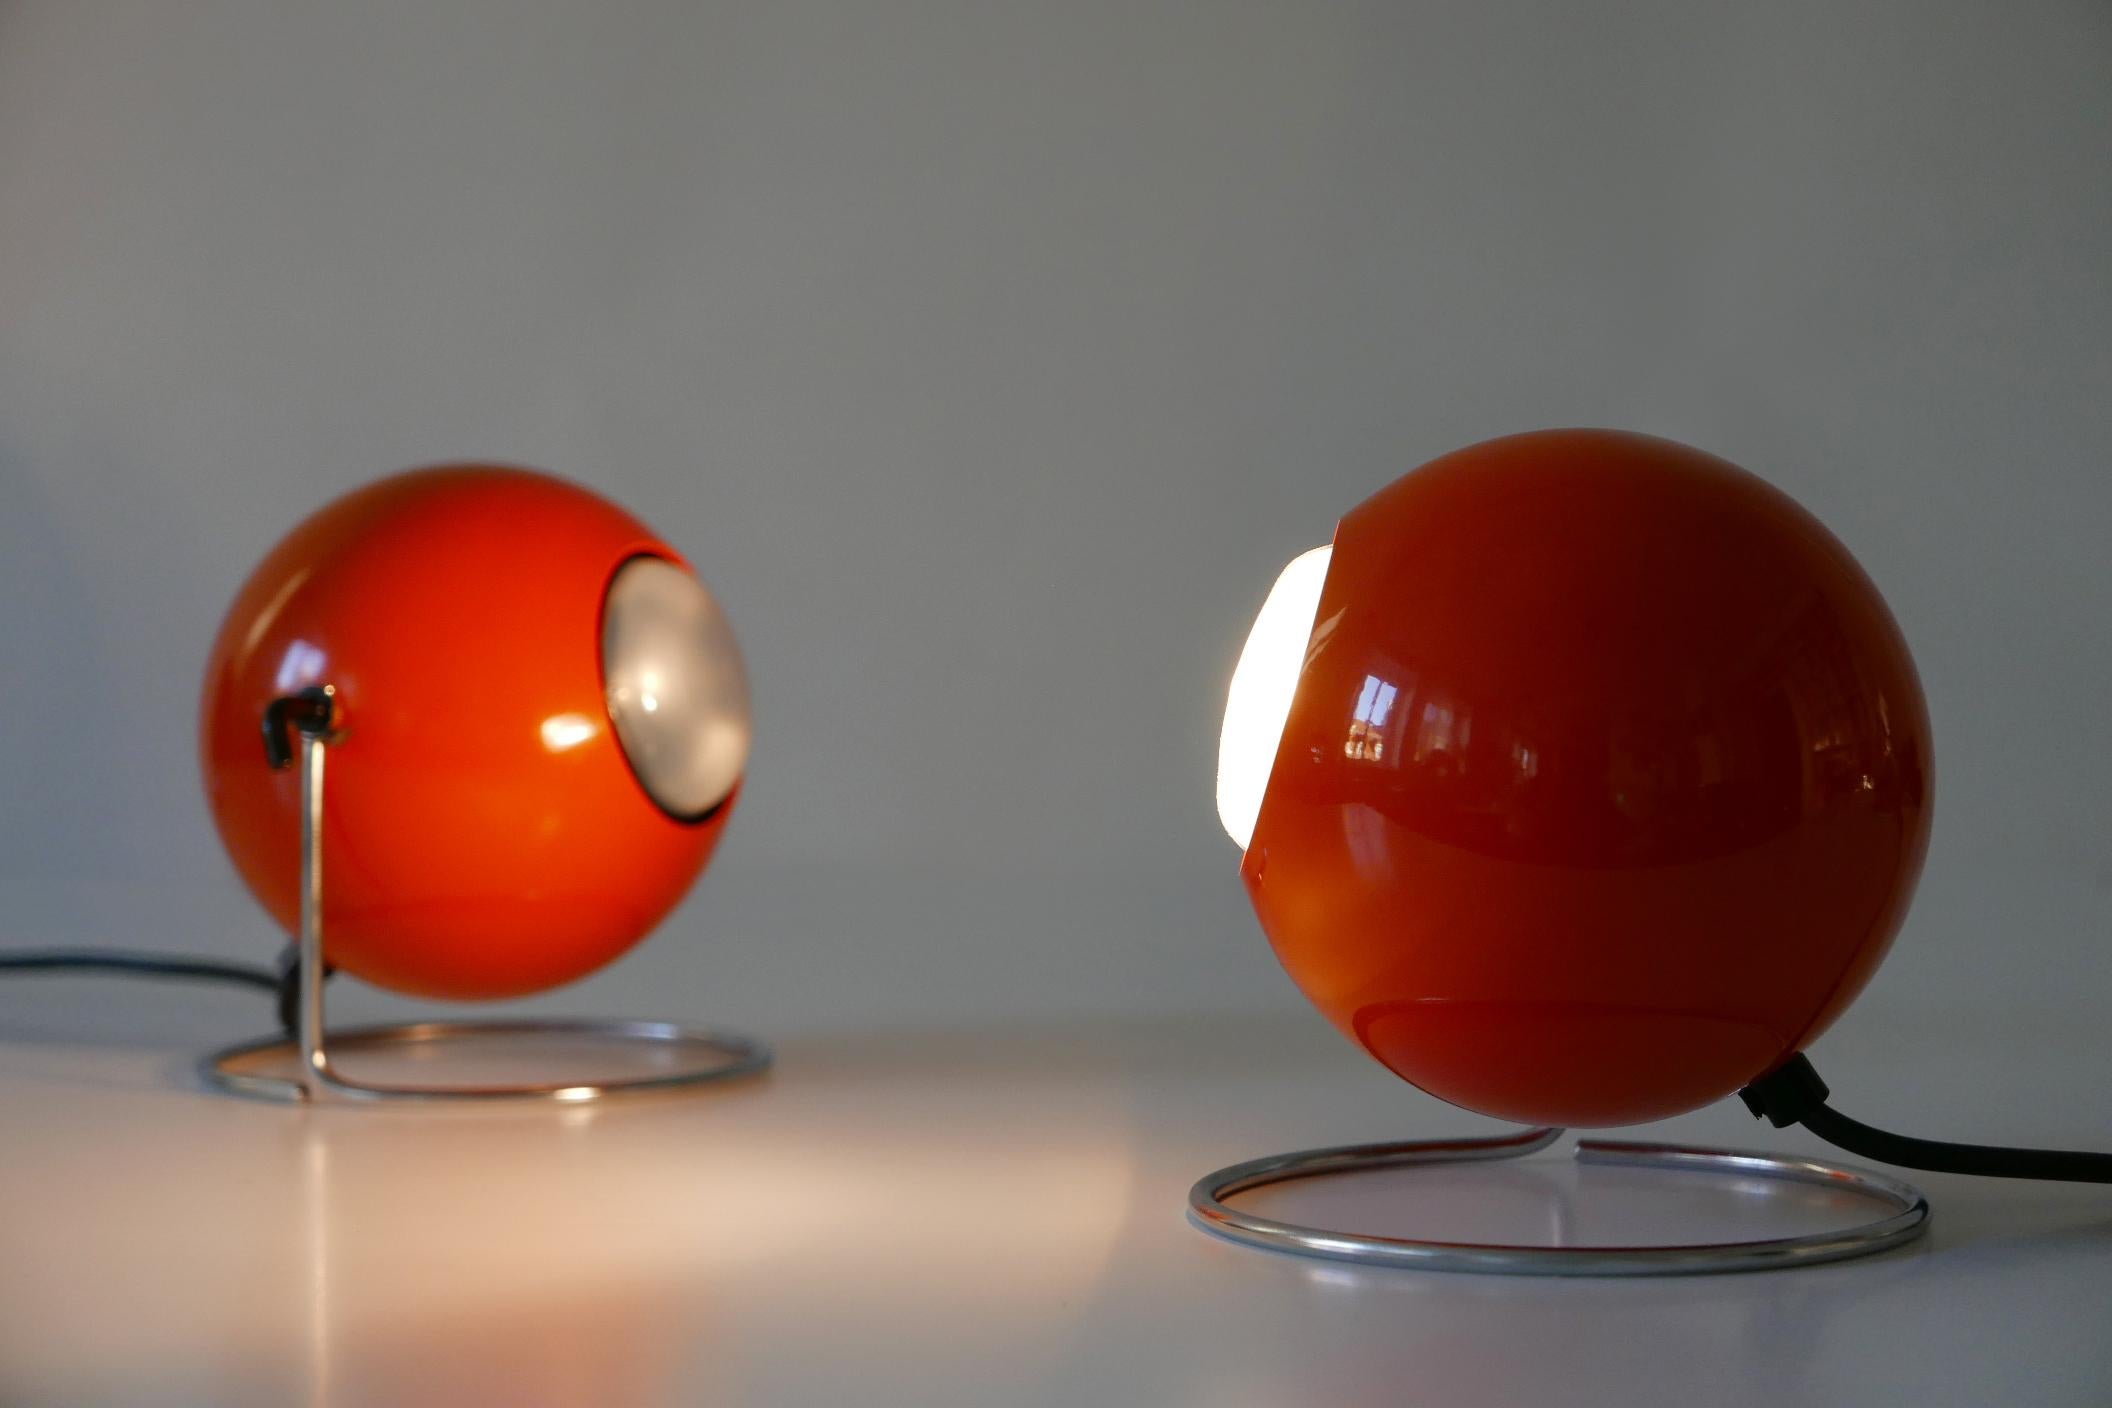 Set of Two Mid-Century Modern Metal 'Eye' Table Lamps, ERCO, 1960s-1970s Germany In Good Condition For Sale In Munich, DE